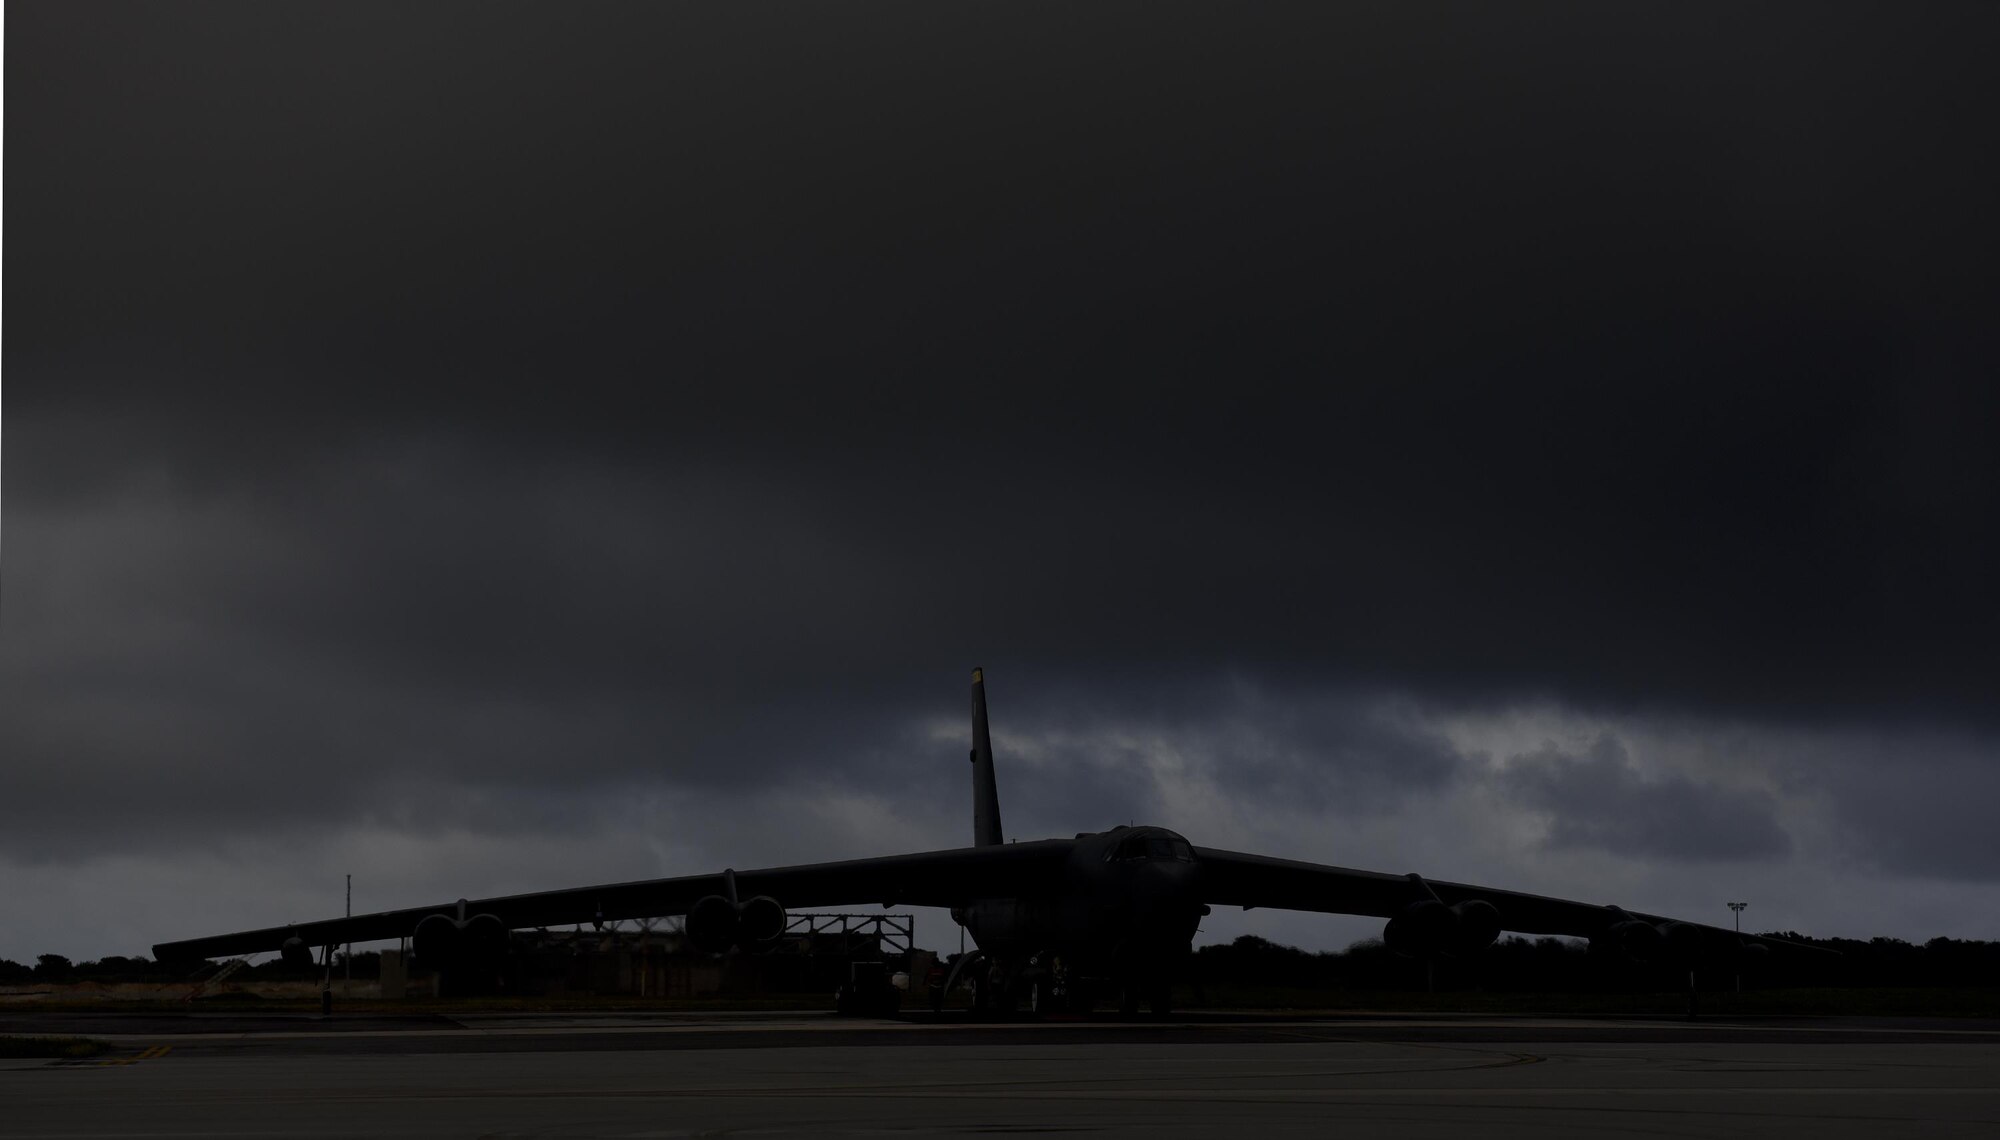 A U.S. Air Force B-52 Stratofortress from Minot Air Force Base, North Dakota, sits on the flightline in preparation for takeoff at Andersen Air Force Base, Guam, Dec. 17, 2016. Three B-52s were deployed to Andersen to conduct local training sorties in the U.S. Pacific Command’s area of responsibility. (U.S. Air Force photo by Staff Sgt. Benjamin Gonsier/Released)